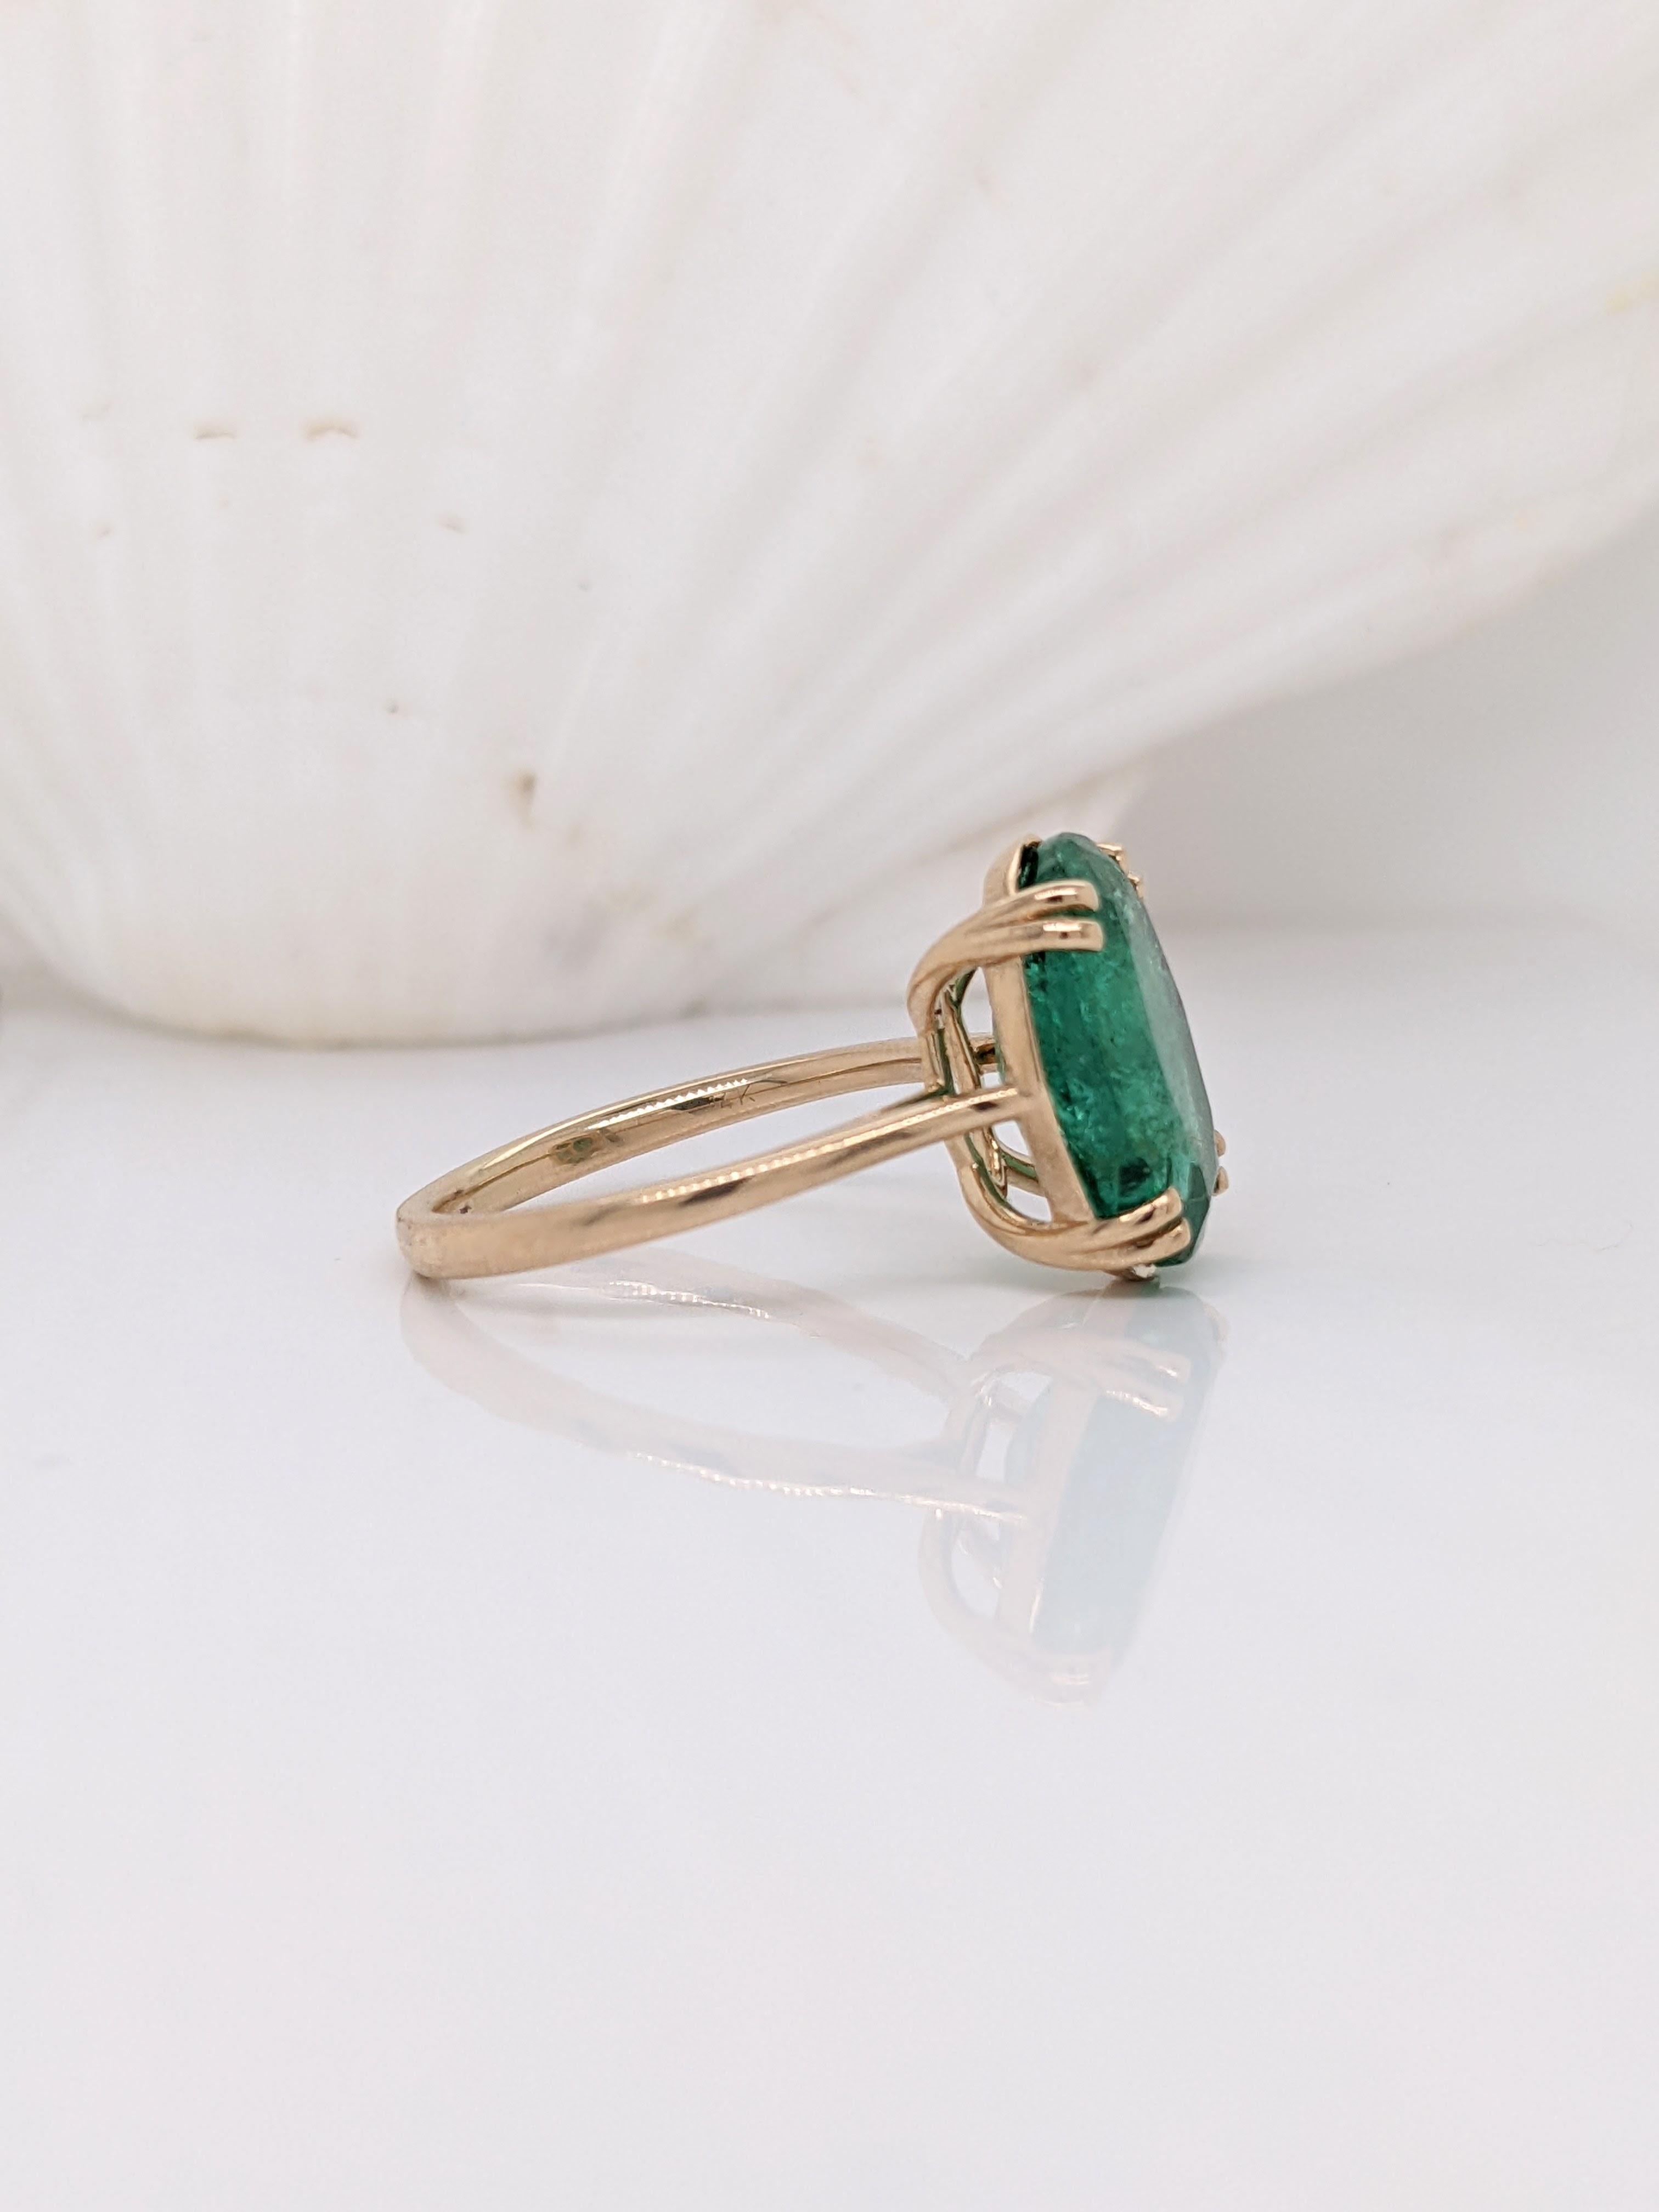 Victorian 4.78ct Emerald Ring in Solid 14k Yellow Gold Solitaire Emerald Oval 14x10mm For Sale